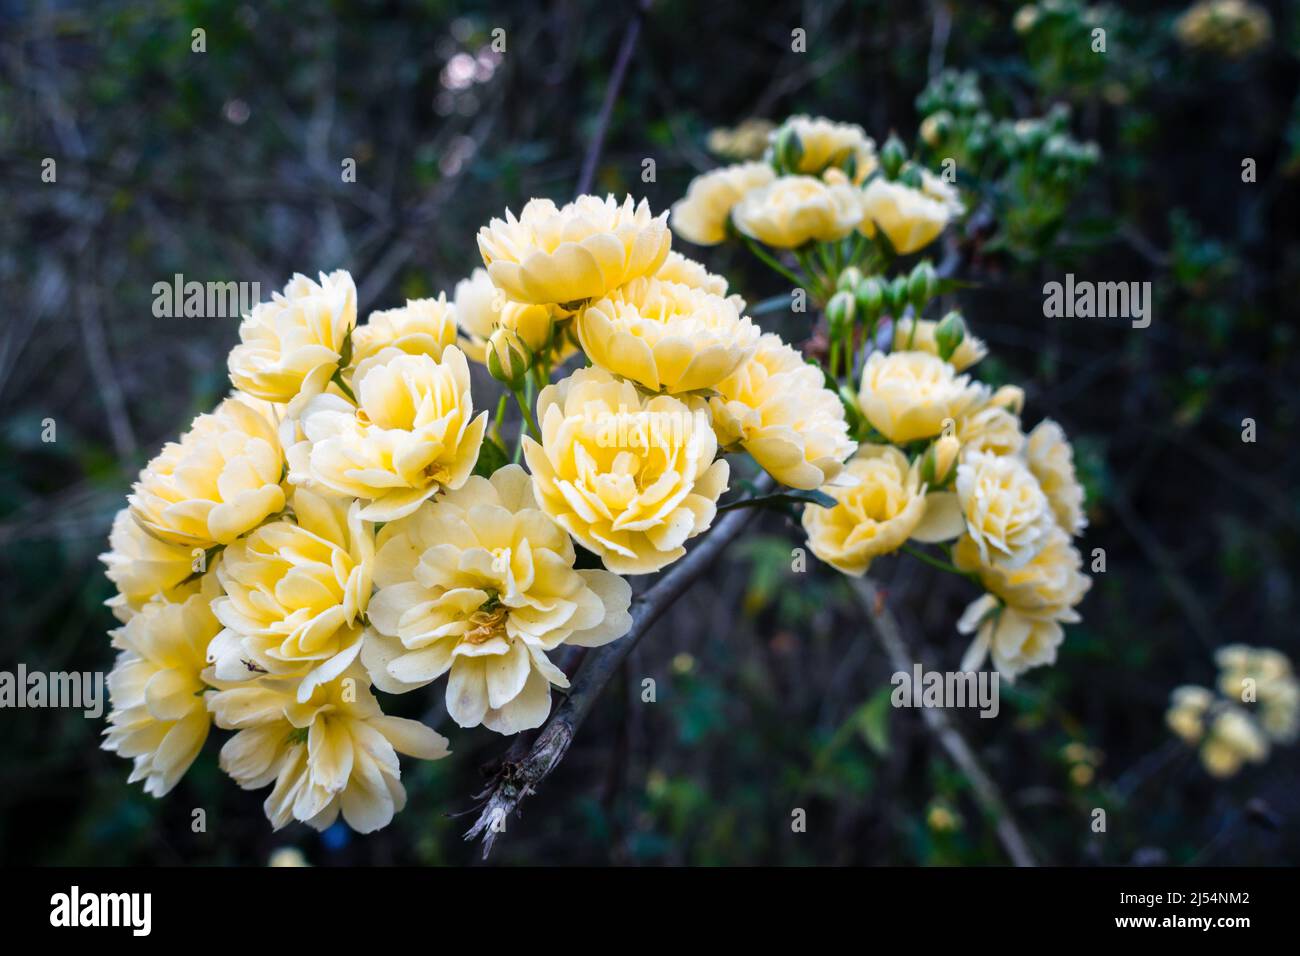 A close up shot of Yellow Garden Roses, Garden roses are predominantly hybrid roses that are grown as ornamental plants in private or public gardens. Stock Photo